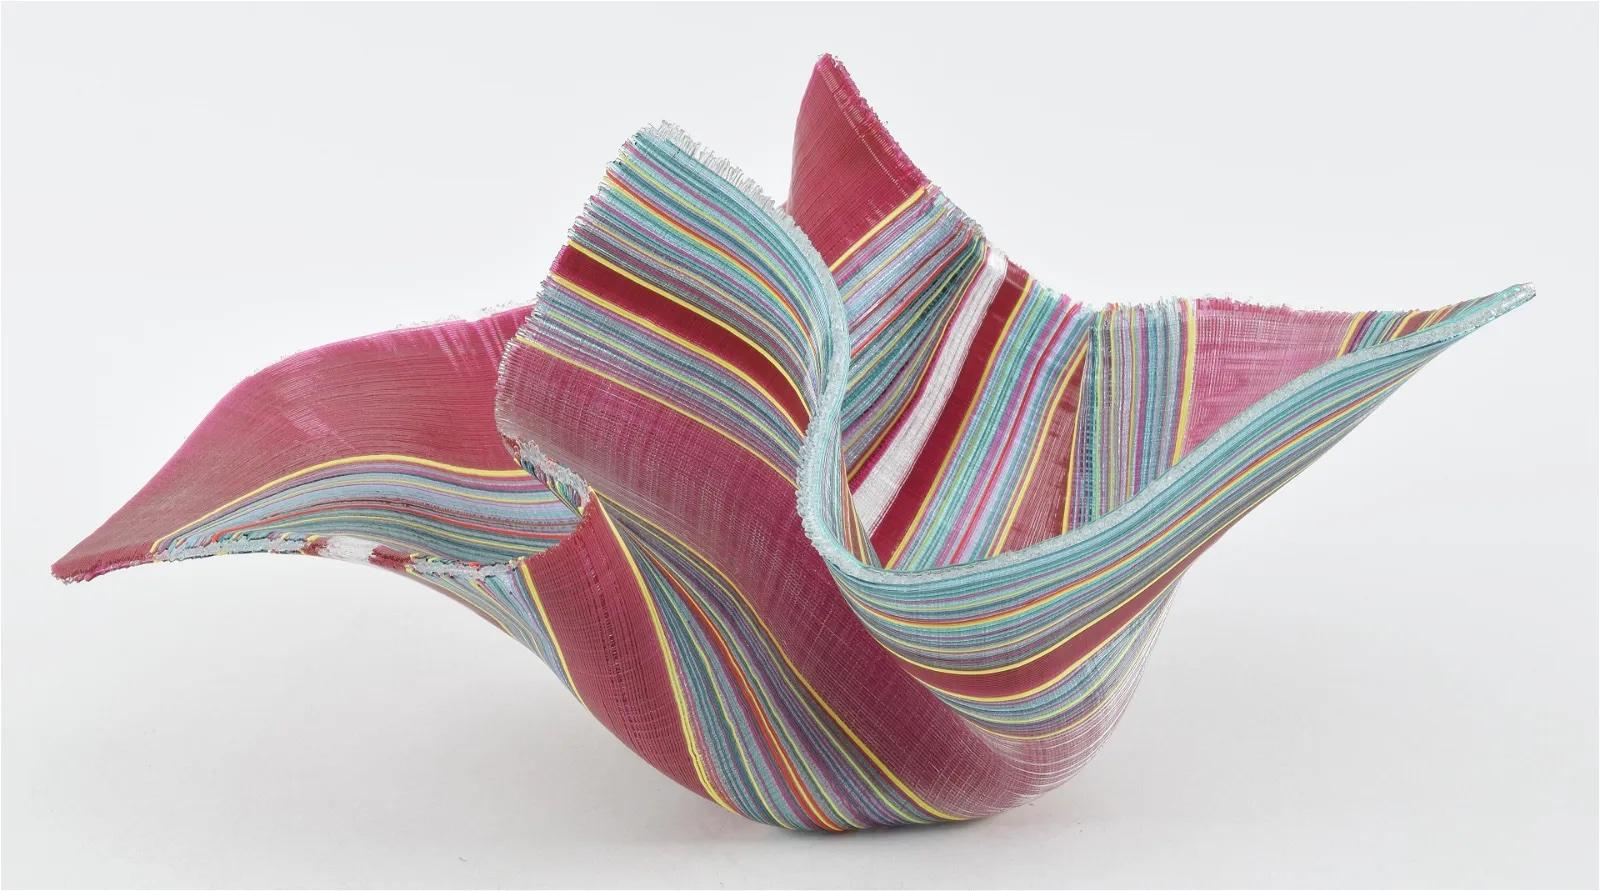 An American Studio Craft woven glass handkerchief sculptural form by, Carole Perry made up of thousands of woven individual glass threads of varying colors, woven and fused together. It is signed, 